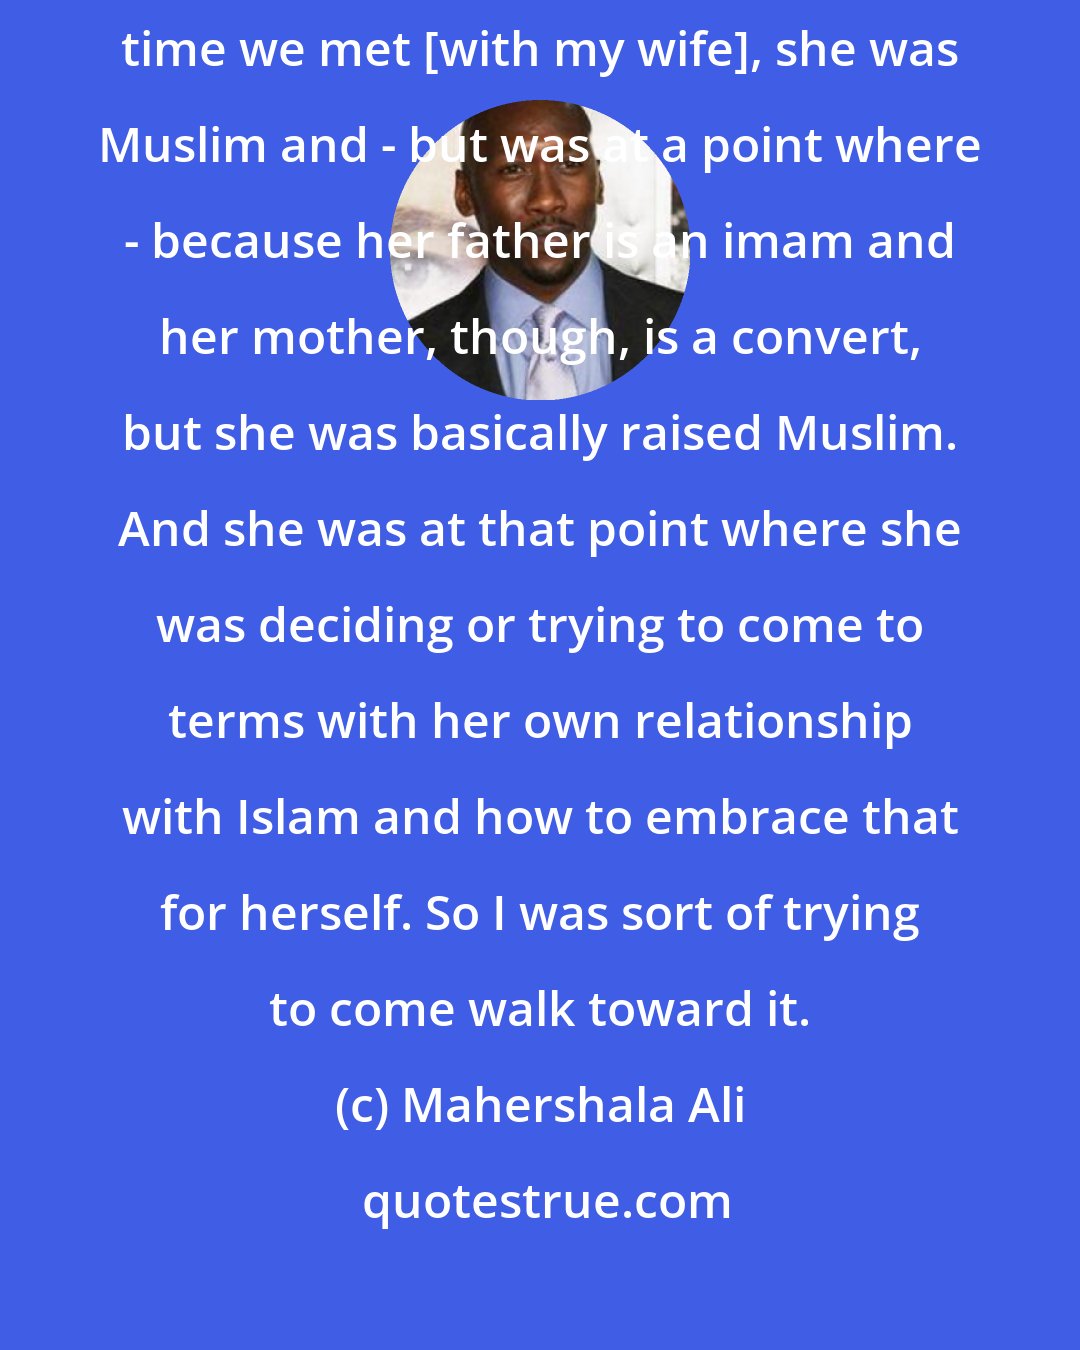 Mahershala Ali: I had gone to - that was my second time going to the mosque. And then at that time we met [with my wife], she was Muslim and - but was at a point where - because her father is an imam and her mother, though, is a convert, but she was basically raised Muslim. And she was at that point where she was deciding or trying to come to terms with her own relationship with Islam and how to embrace that for herself. So I was sort of trying to come walk toward it.